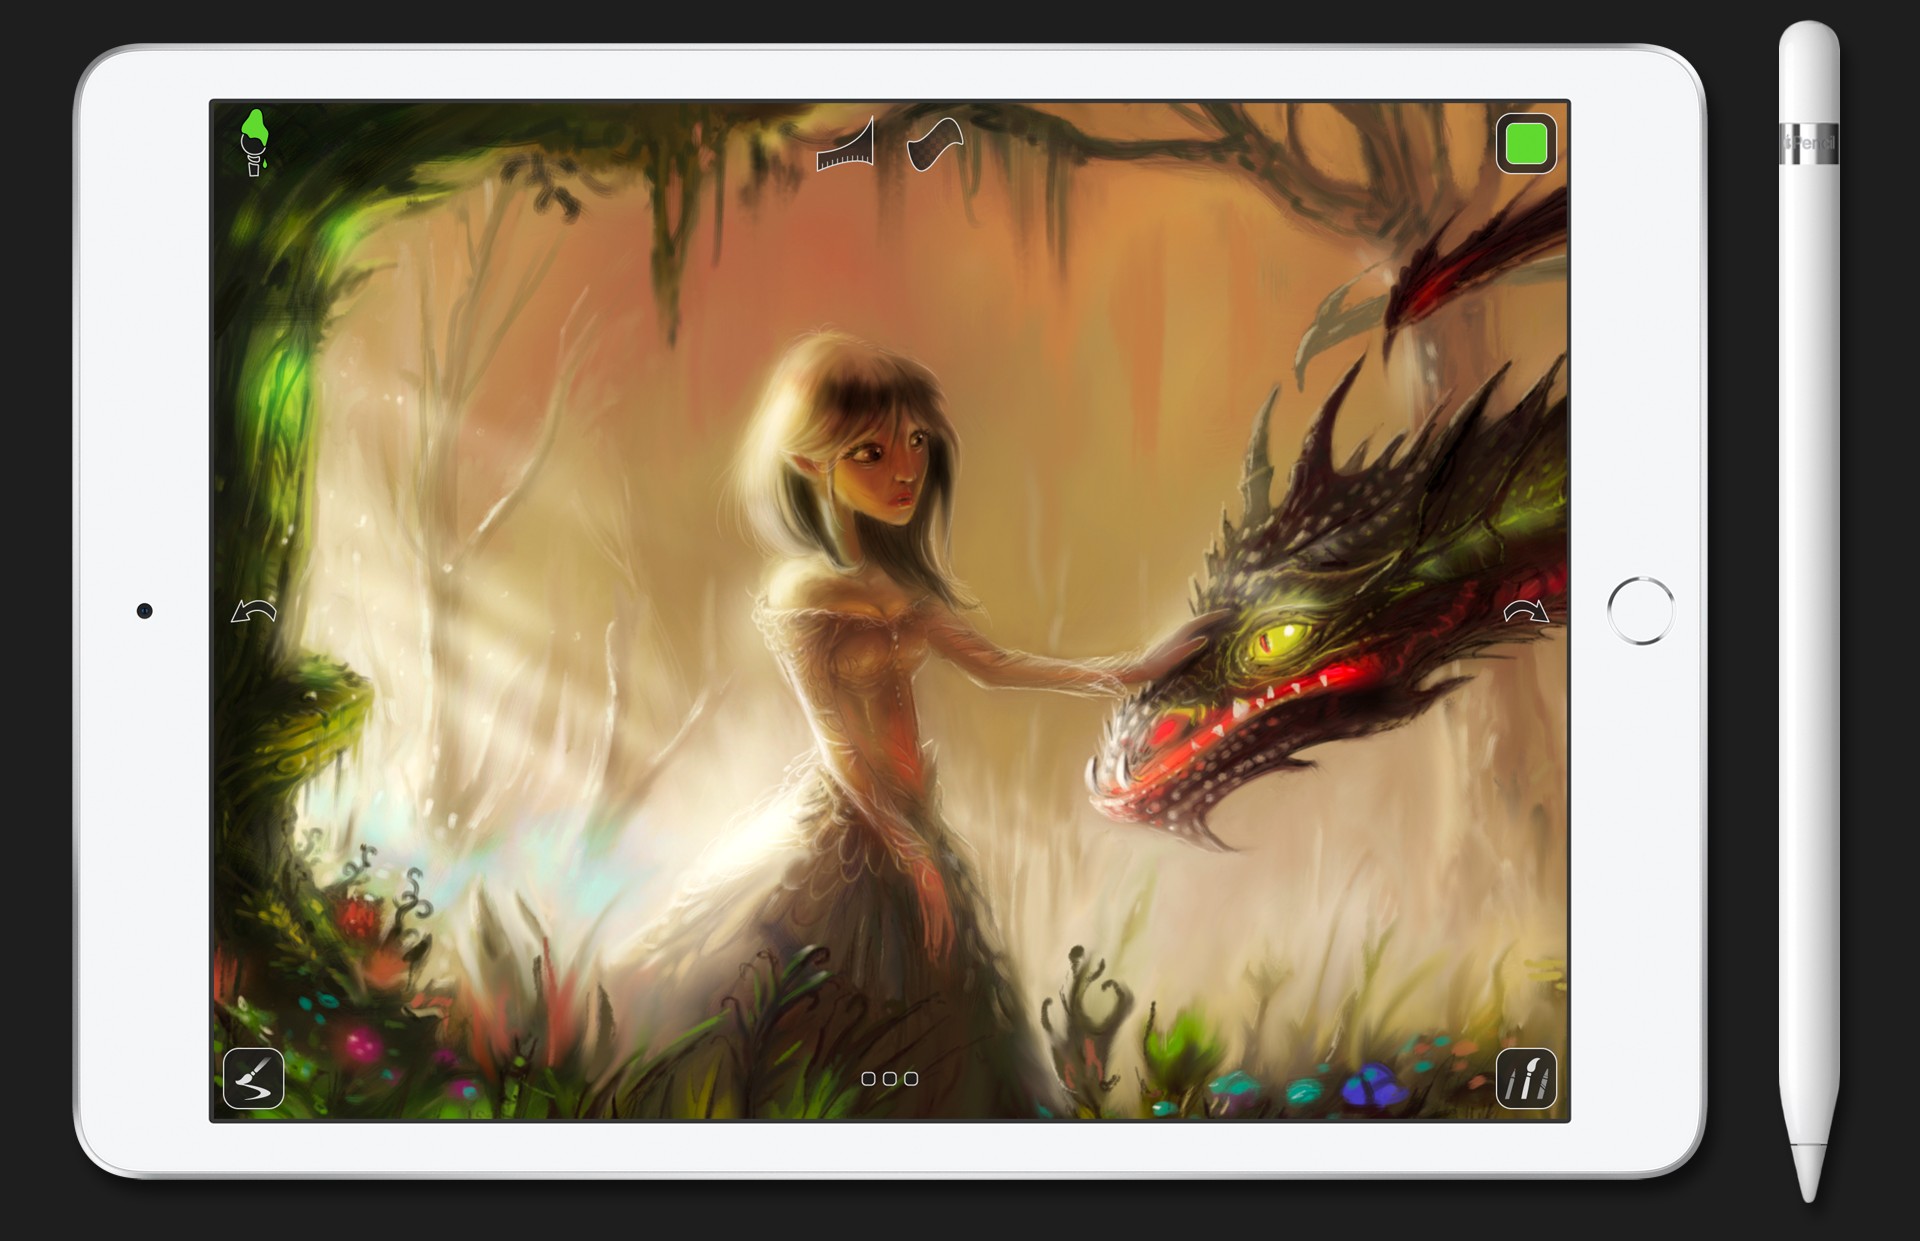 Drawing apps for iPad: Digital painting of a girl and her dragon